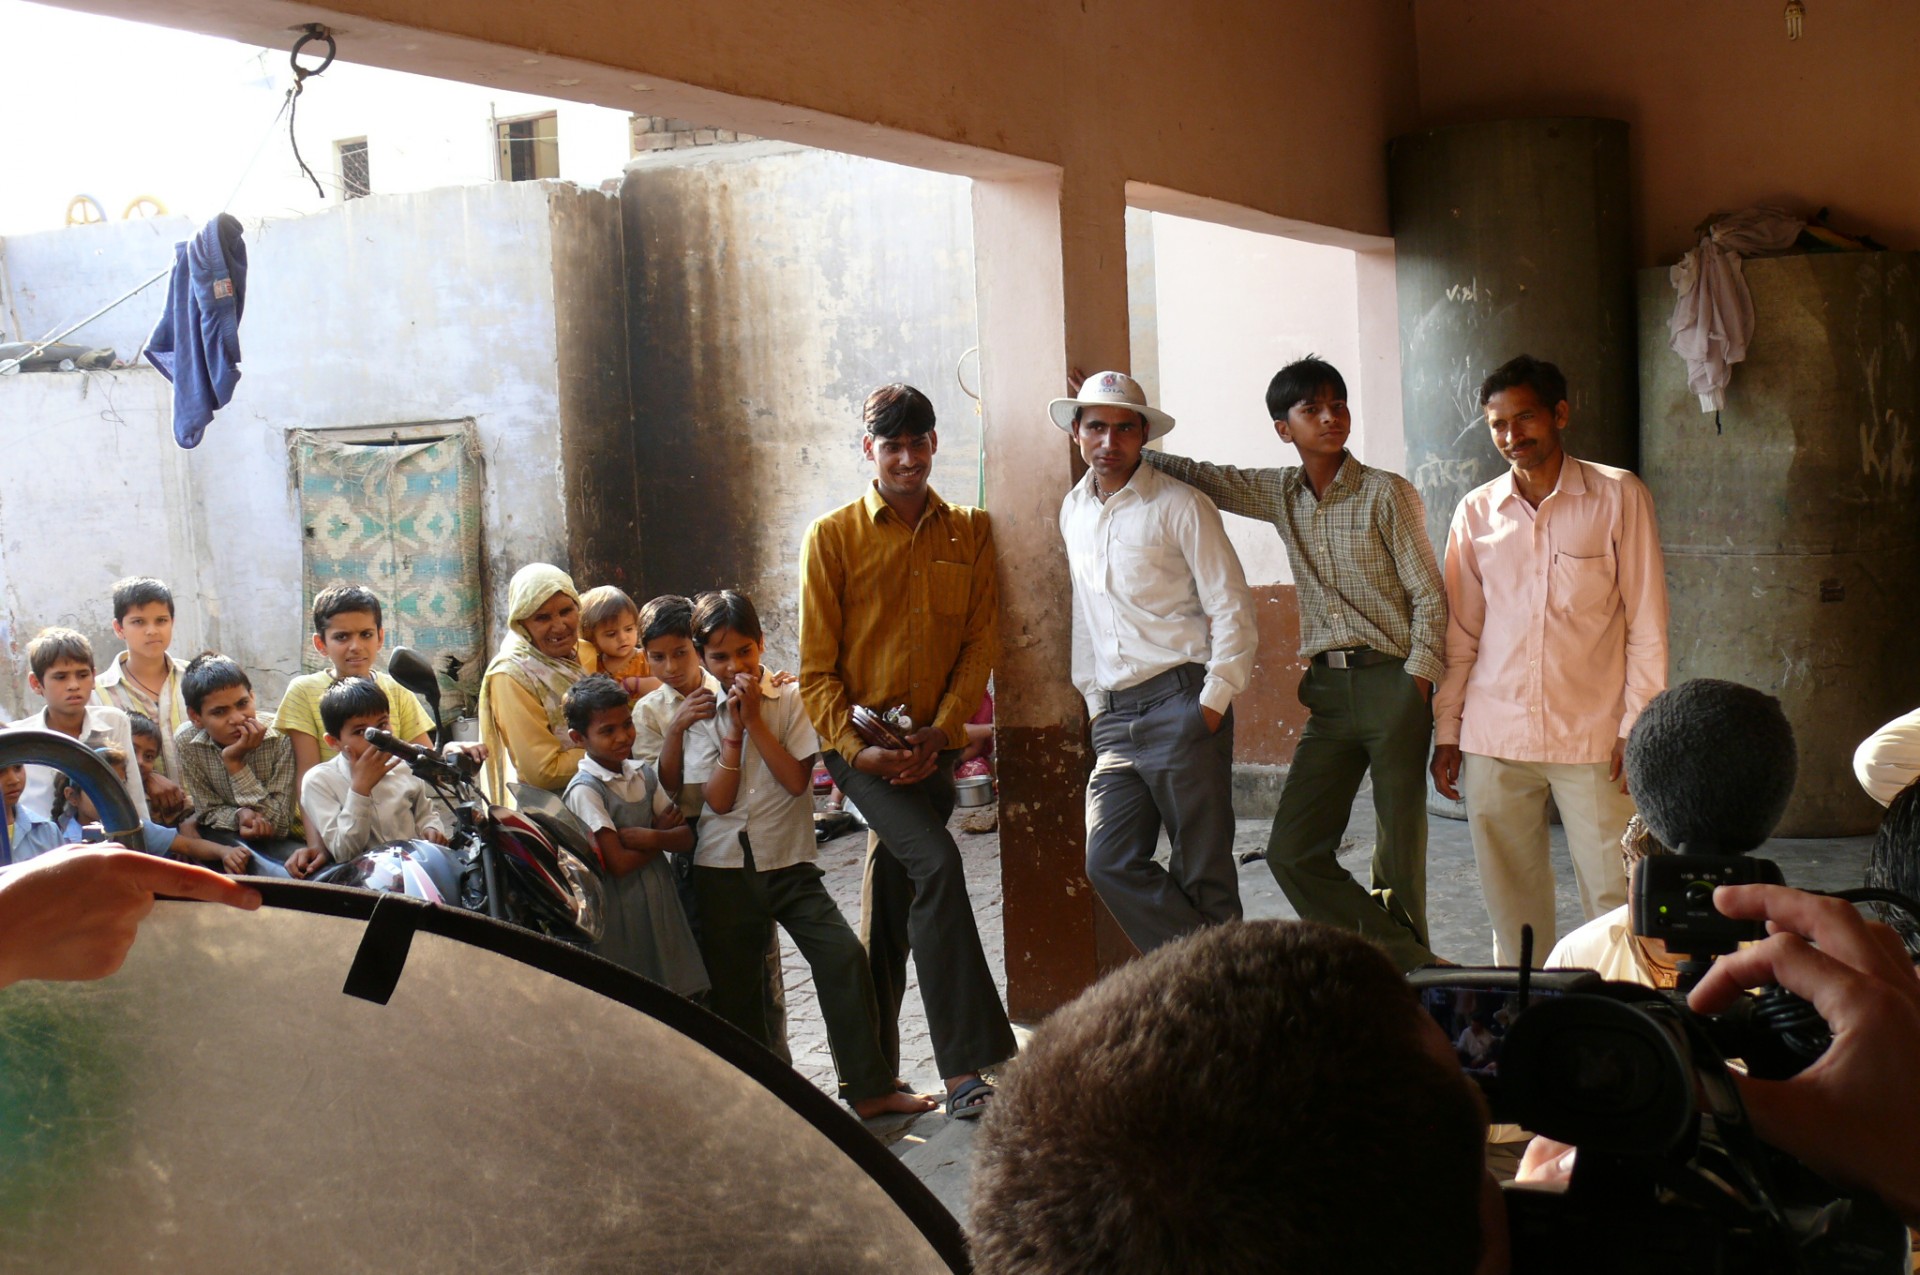 The entire village watches. Filming the lunch scene from the 'Reconnection' at the village house in Jet, India.